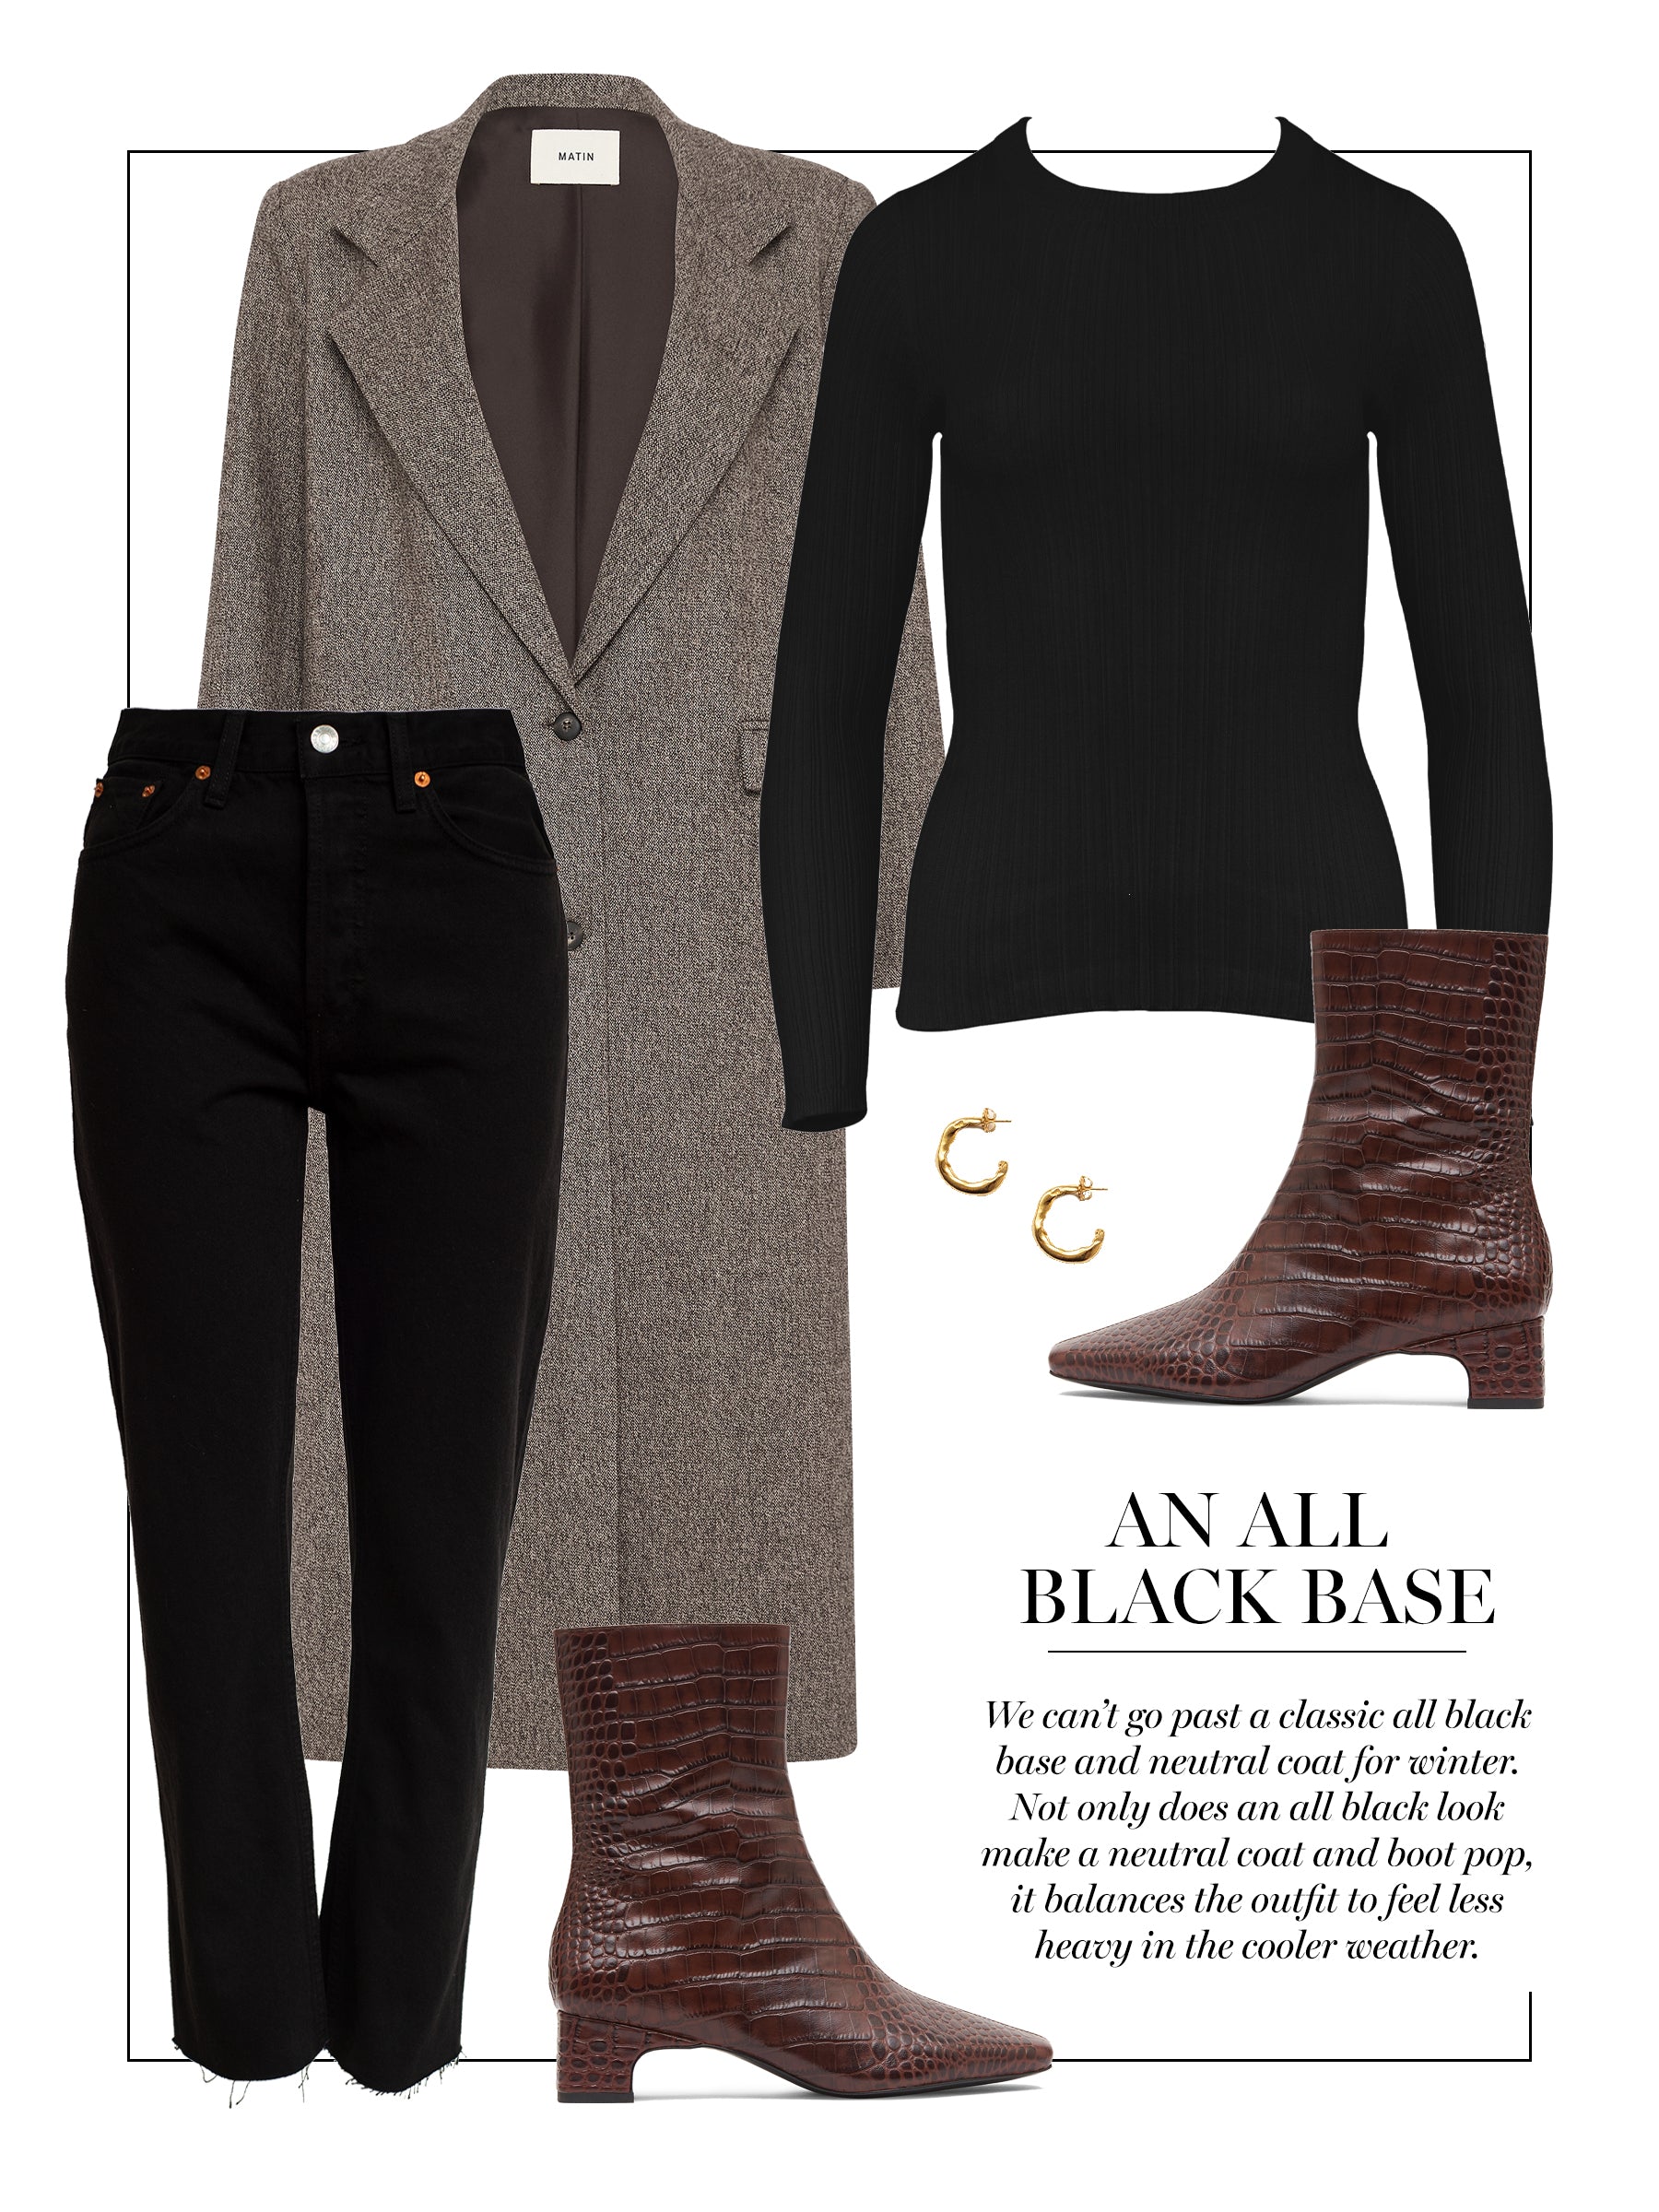 An all black base, layered with a neutral coat or jacket